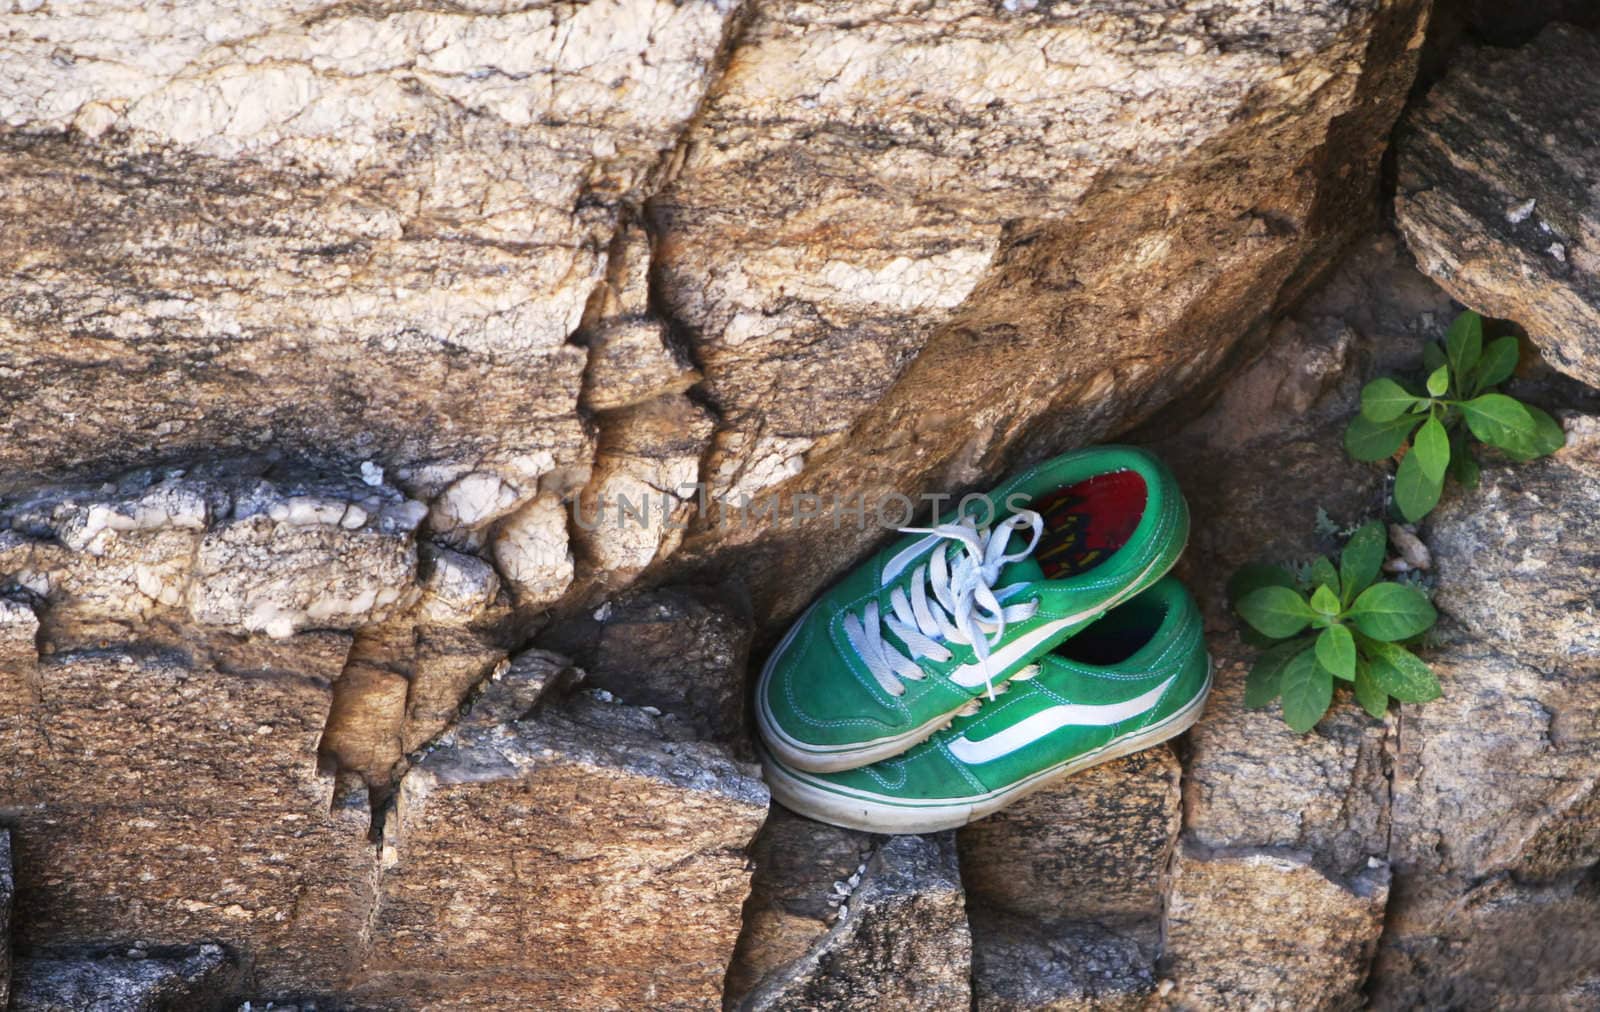 Green tennis shoes resting on a rock ledge